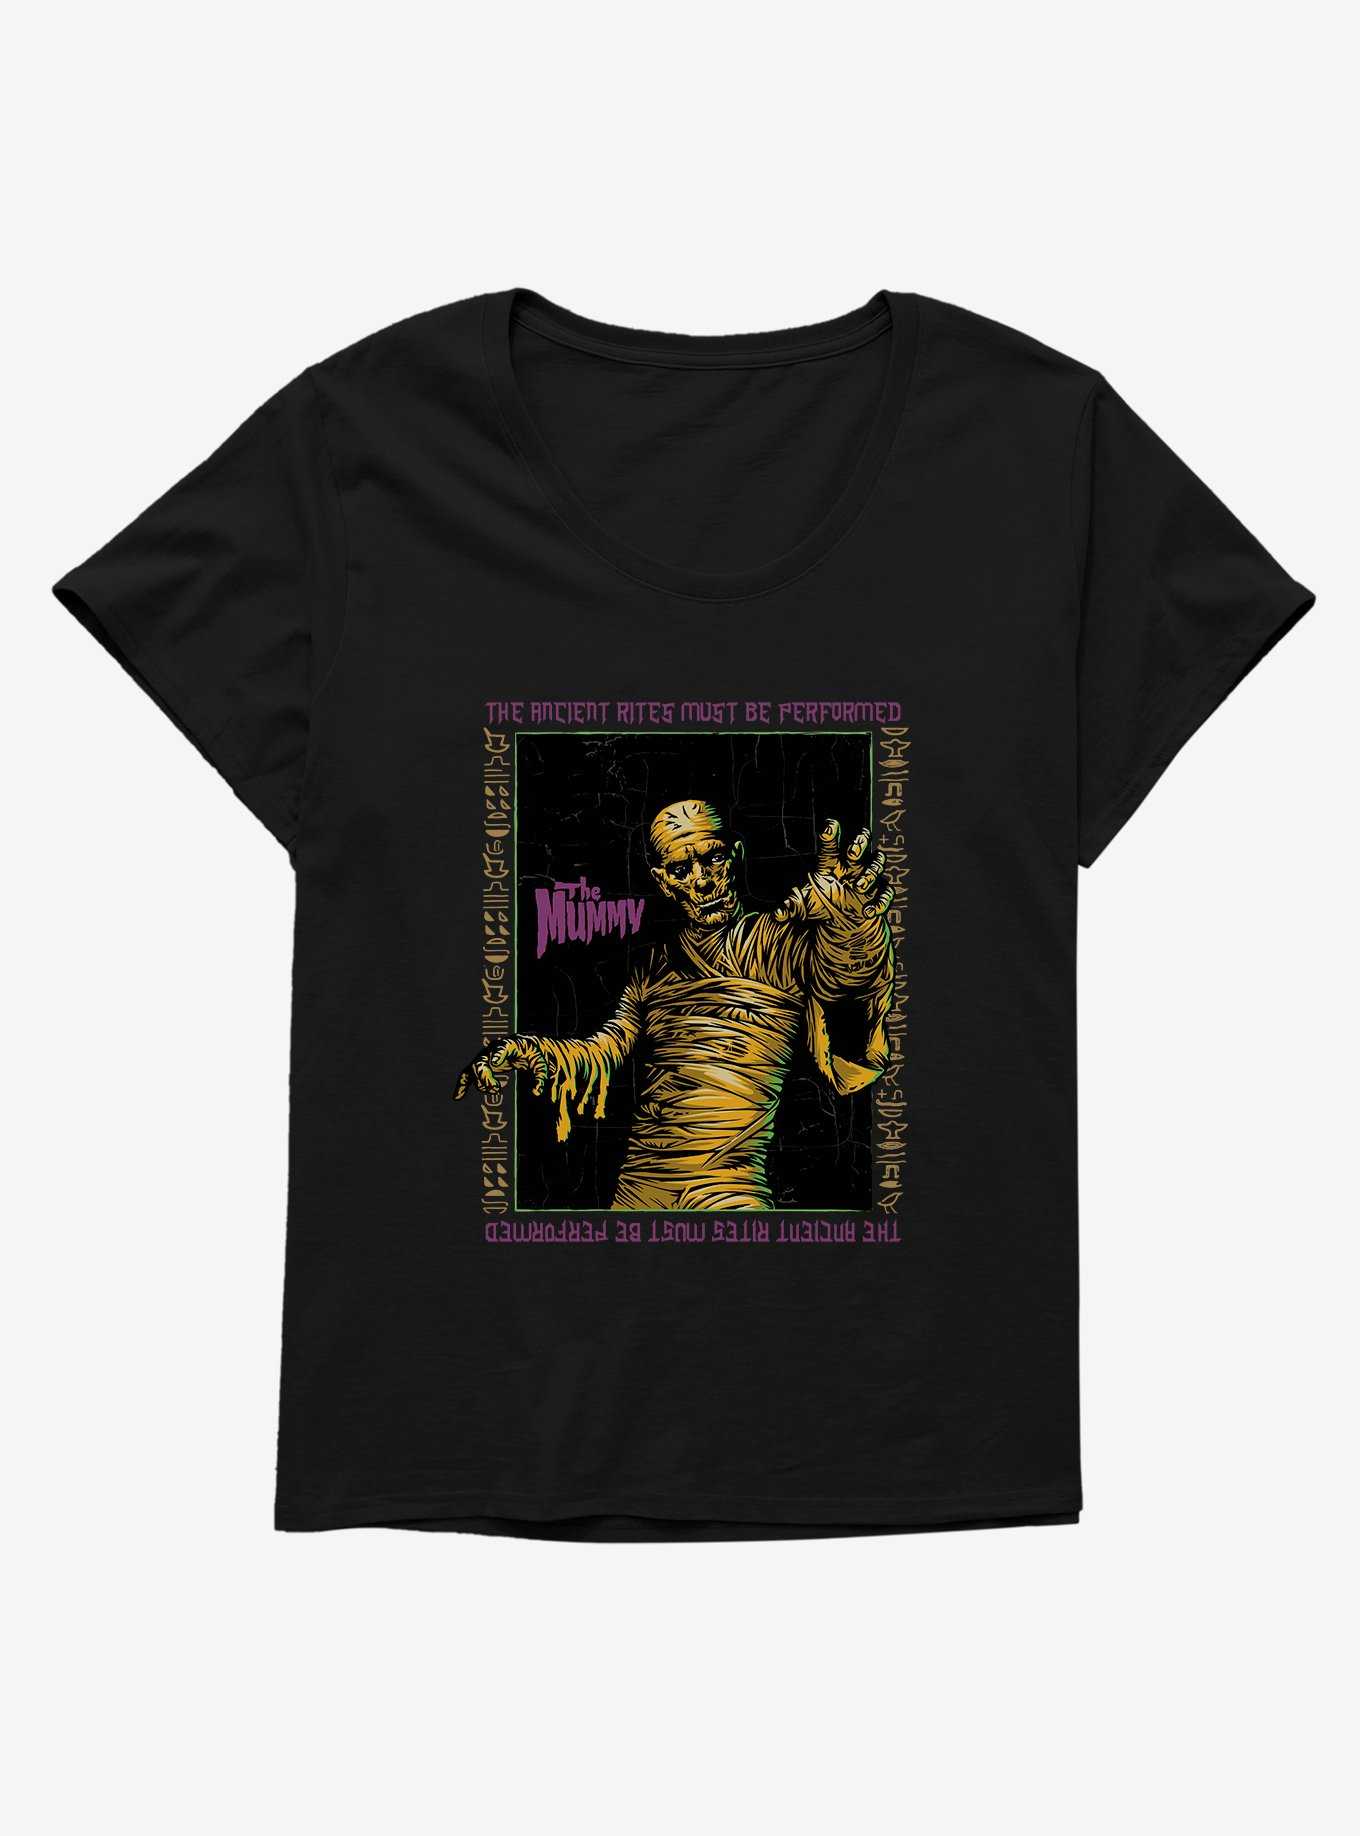 Universal Monsters The Mummy Ancient Rites Must Be Performed Girls T-Shirt Plus Size, , hi-res